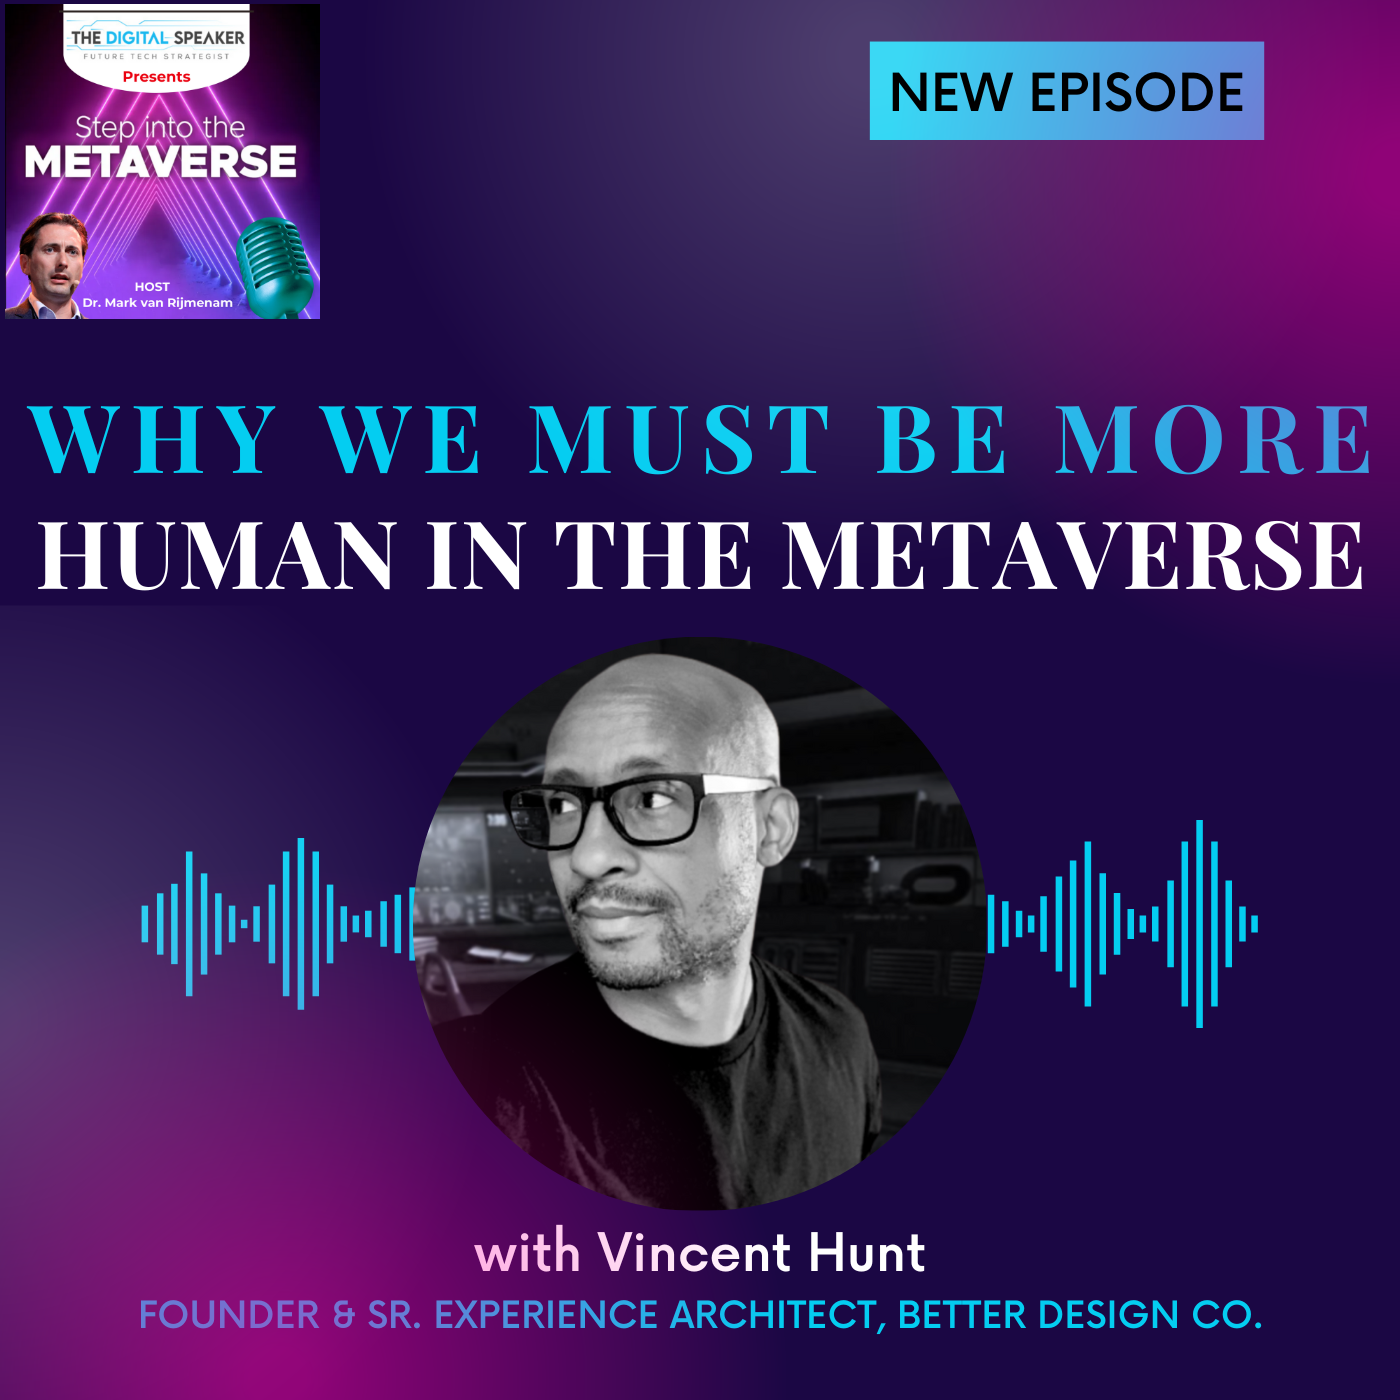 https://www.thedigitalspeaker.com/why-must-be-more-human-metaverse-with-vincent-hunt-step-into-the-metaverse-podcast-ep11/